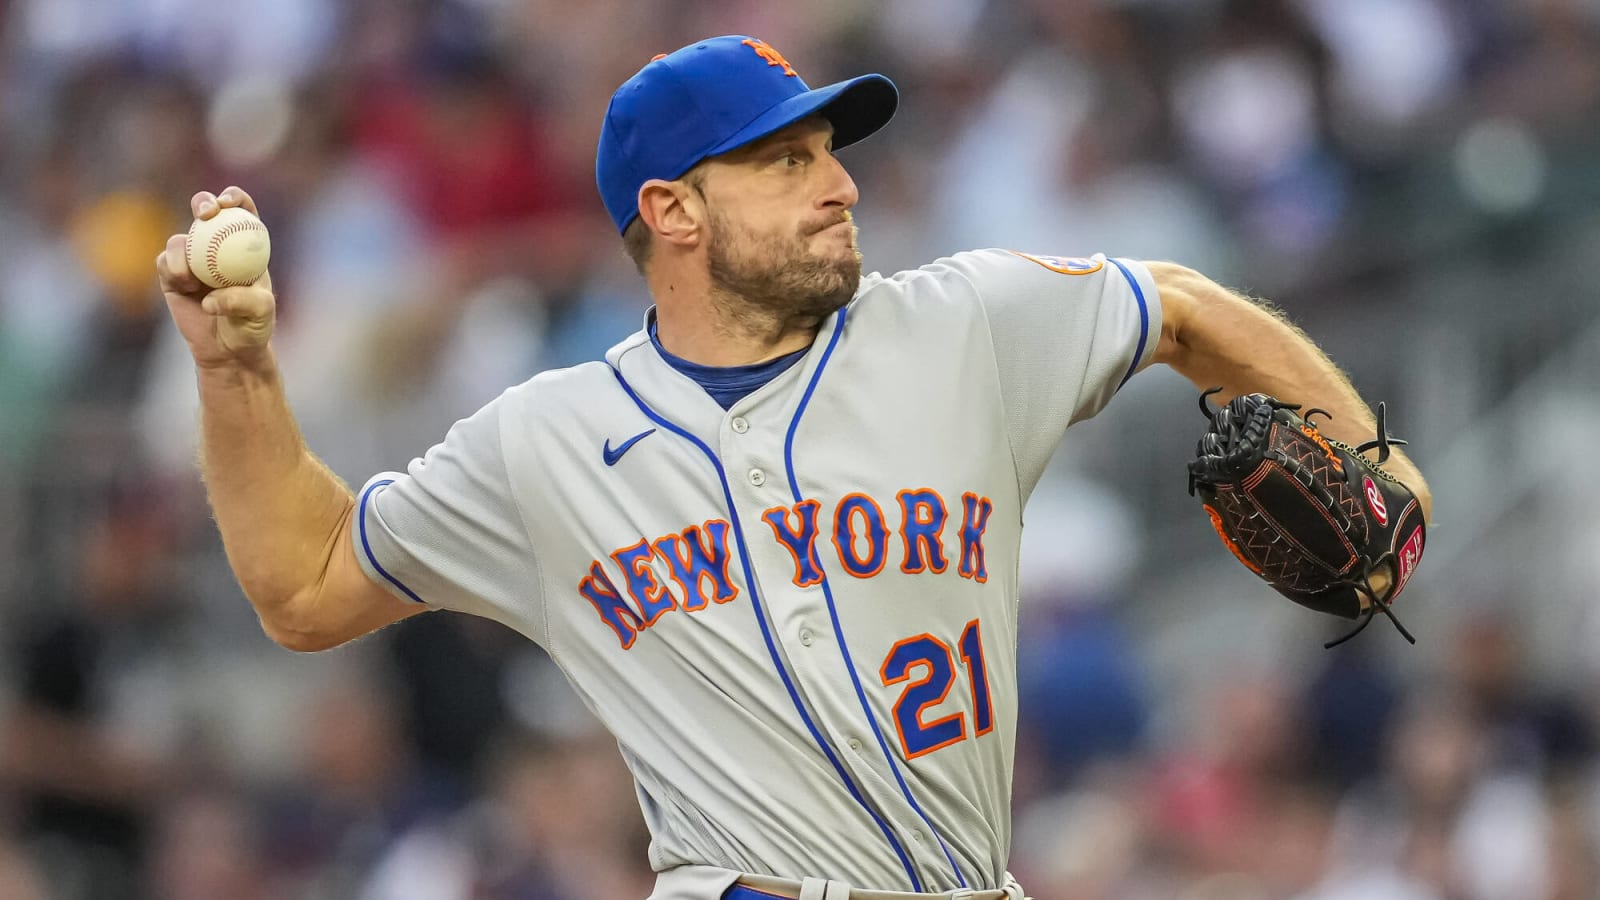 Padres-Mets matchup is prime opportunity